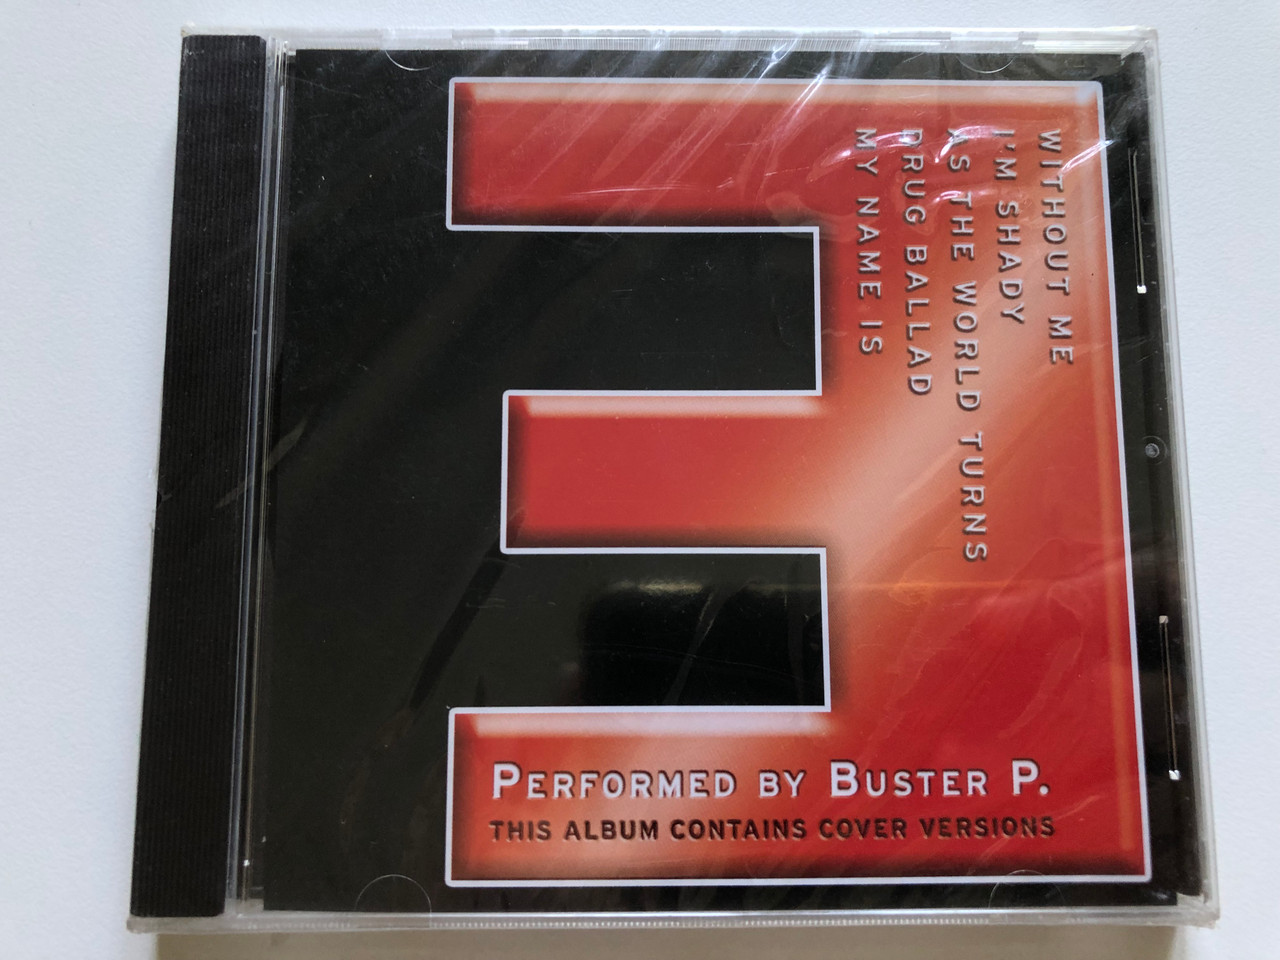 https://cdn10.bigcommerce.com/s-62bdpkt7pb/products/0/images/244300/The_Music_Of_Eminem_-_Performed_by_Buster_P._This_Album_Contains_Cover_Versions_Without_Me_Im_Shady_As_The_World_Turns_Drug_Ballad_My_Name_Is_Millennium_Gold_Audio_CD_2002_MG2136_1__53918.1659364006.1280.1280.JPG?c=2&_gl=1*19lzt6m*_ga*MjA2NTIxMjE2MC4xNTkwNTEyNTMy*_ga_WS2VZYPC6G*MTY1OTM2MTk0MC41MDcuMS4xNjU5MzYzNzQyLjIx